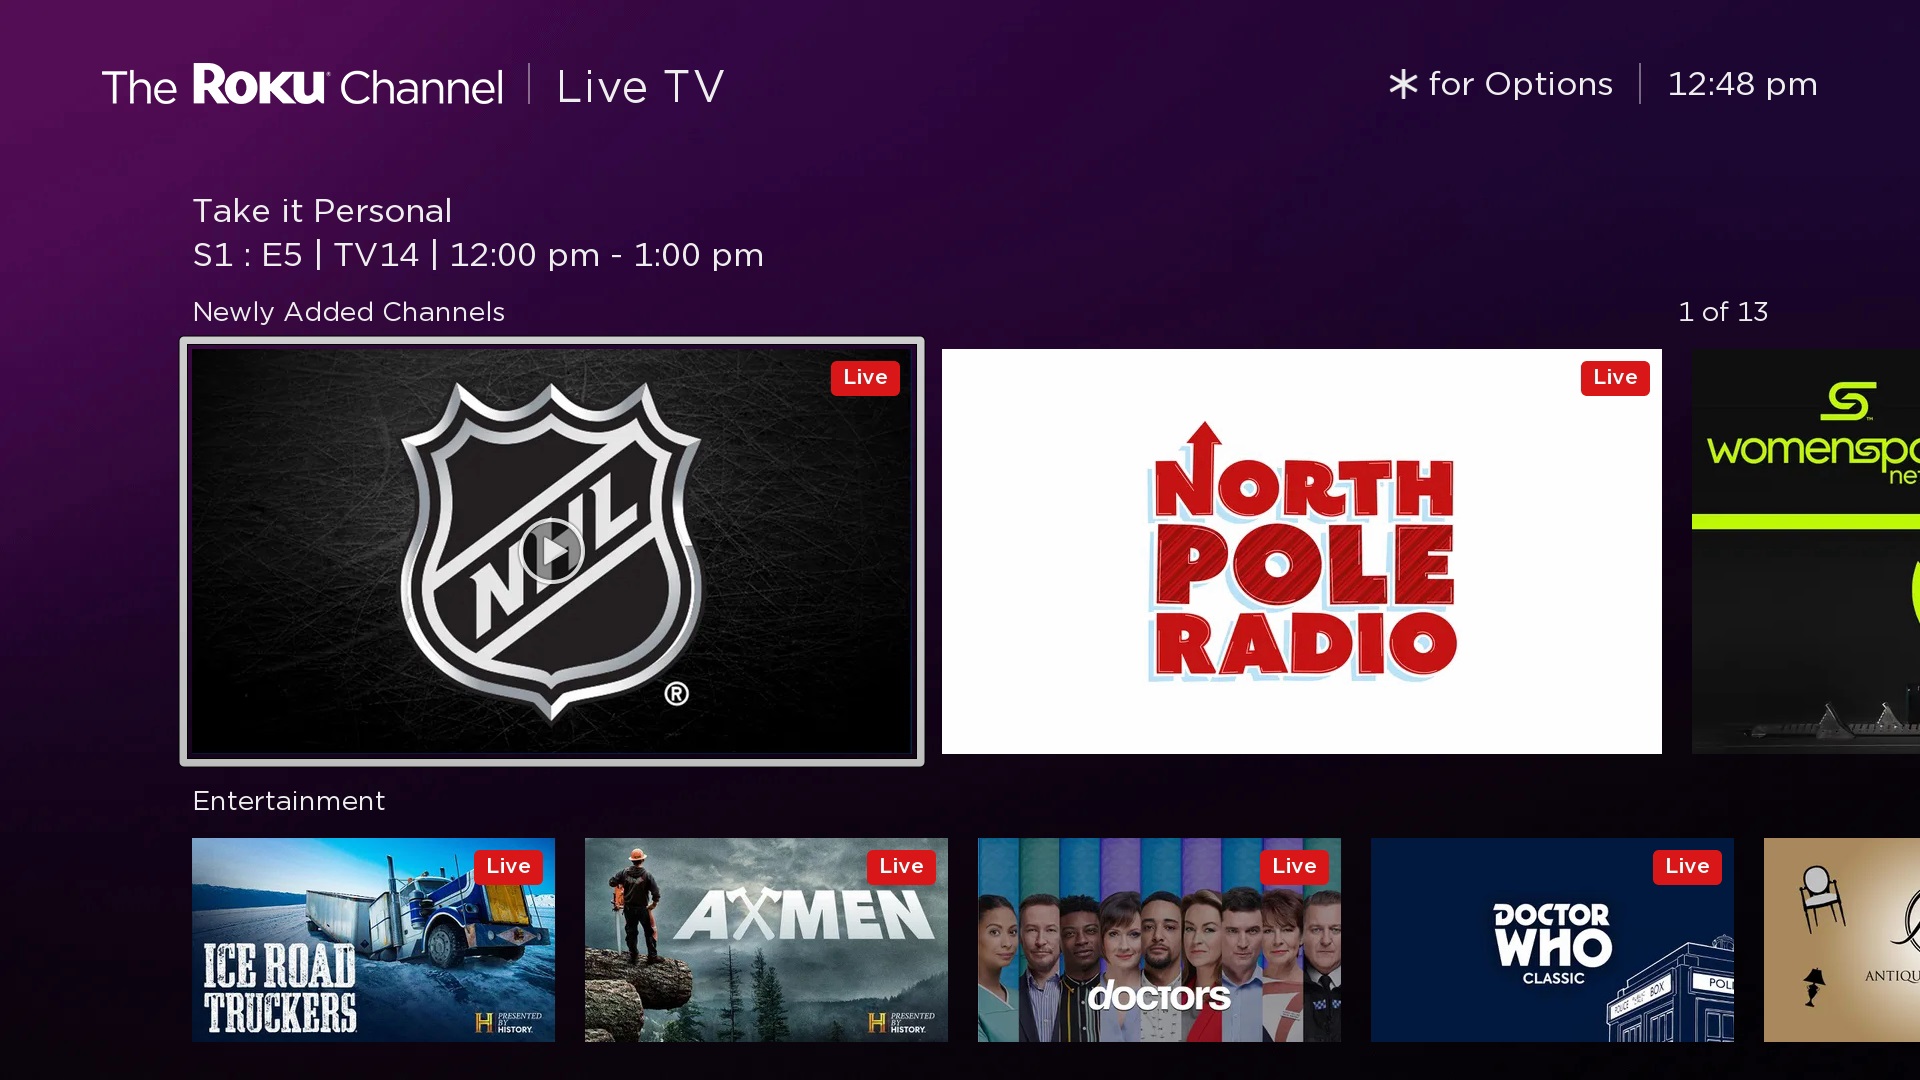 If you have a Roku, youâre getting 13 new channels for free this month